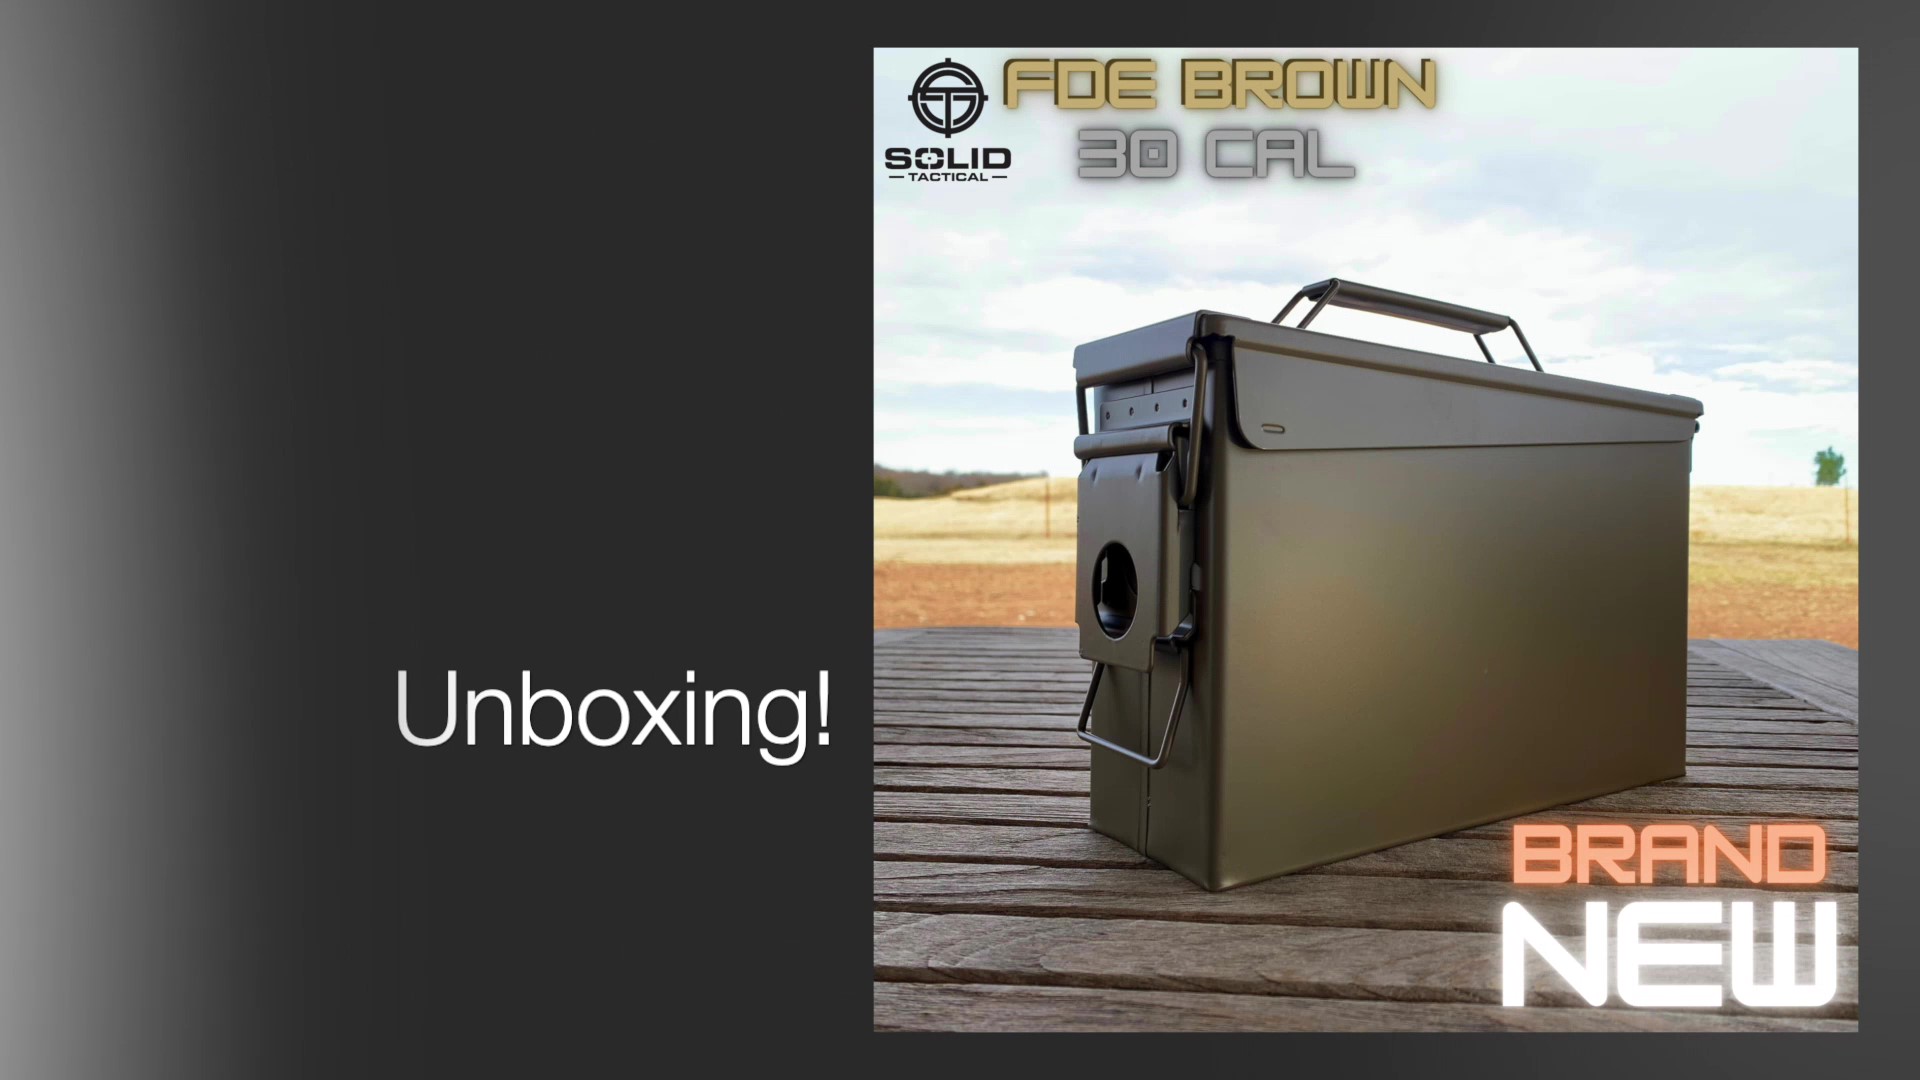 RPNB AM191 Metal Ammo Can .30 Cal Military Heavy Gauge Water Resistant -  Safe and Vault Store.com